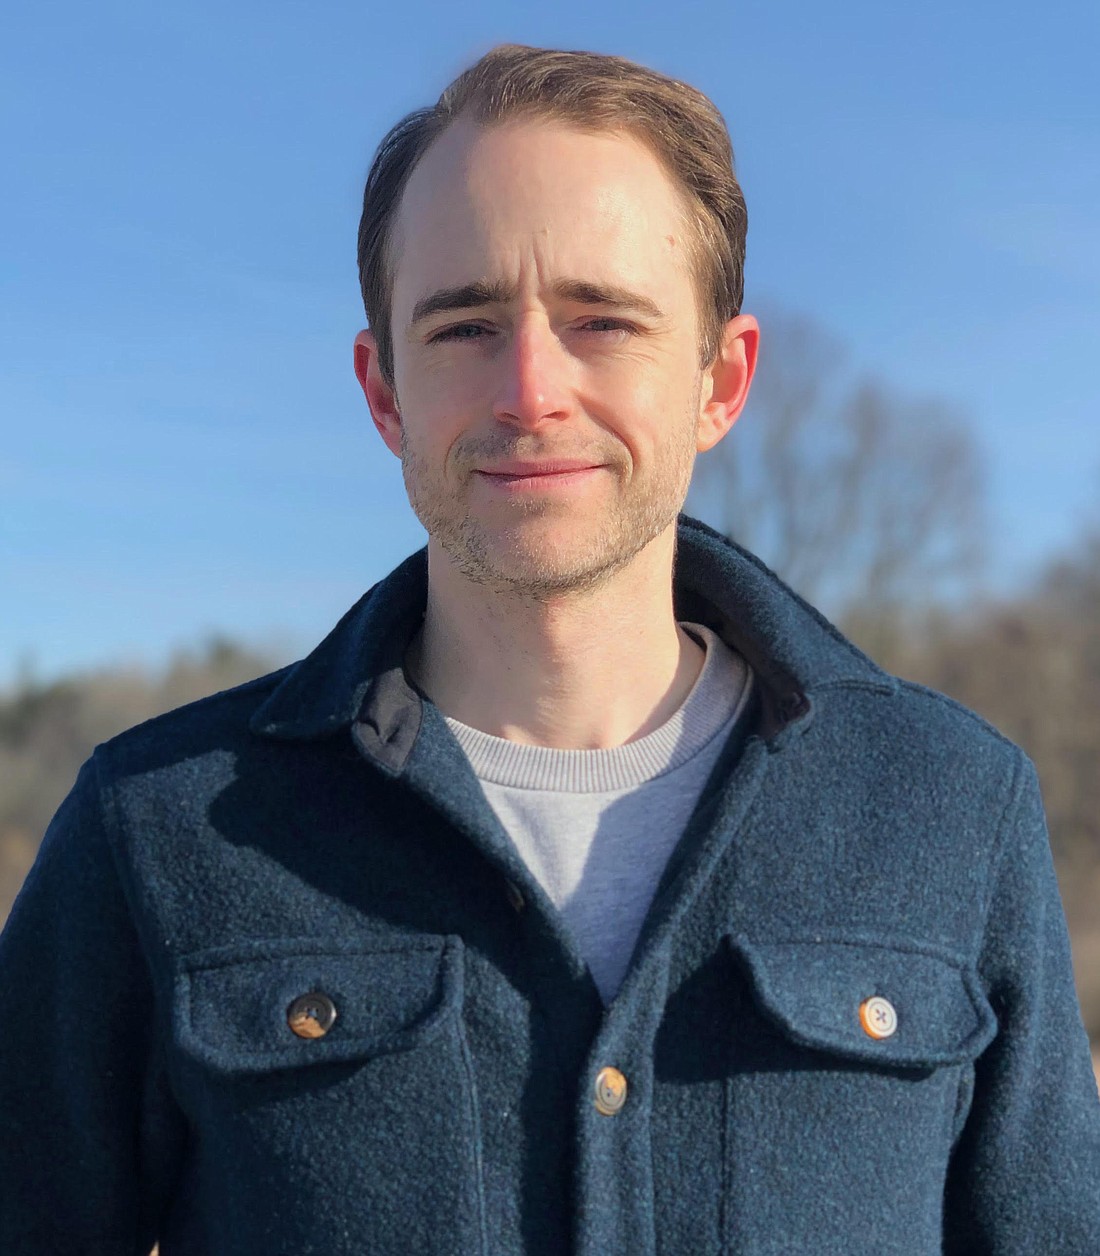 Bellingham-based writer Ryler Dustin developed his skill as a poet and spoken word performer at the long-running Poetry Night open mic at Stuart’s Coffeehouse. He'll read from his latest book of poetry, “Trailer Park Psalms,” Sunday, Sept. 17 at Village Books.